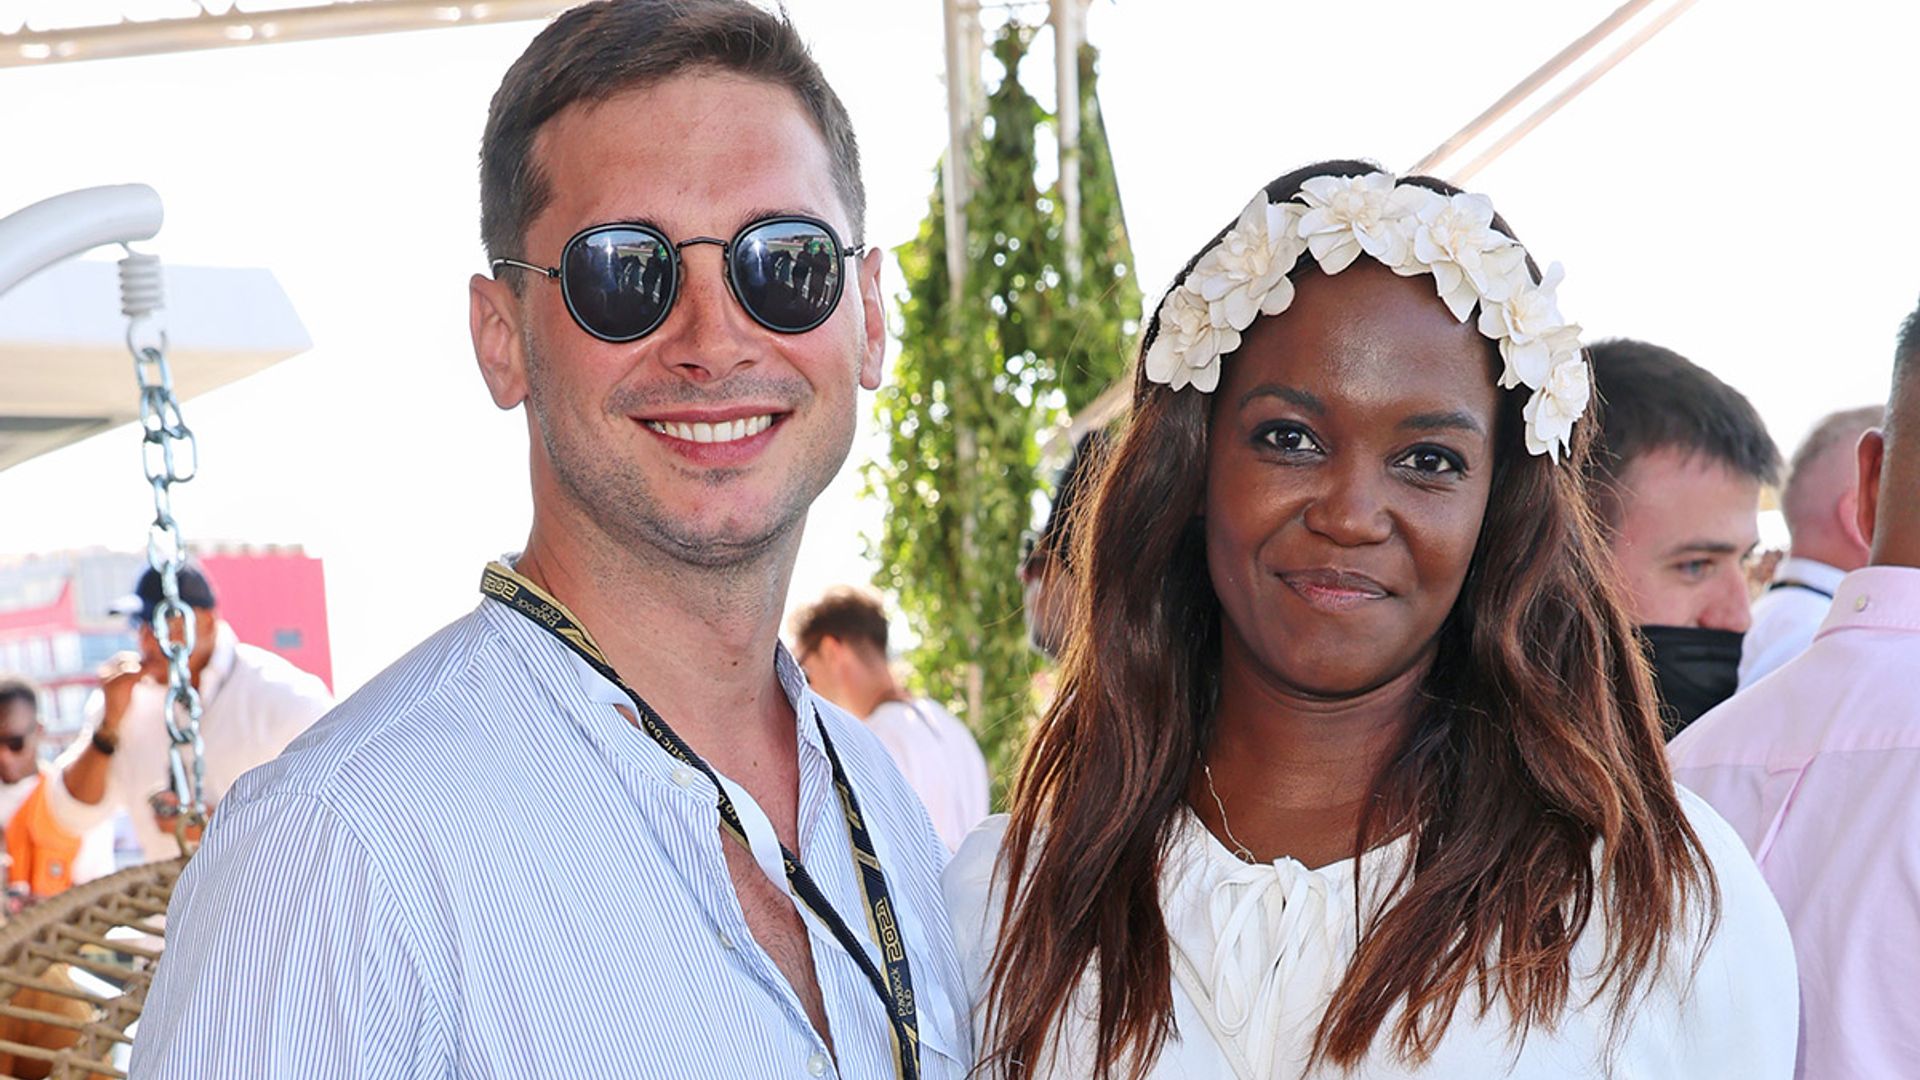 Oti Mabuse's rare comment on marrying her 'beautiful' husband aged 23